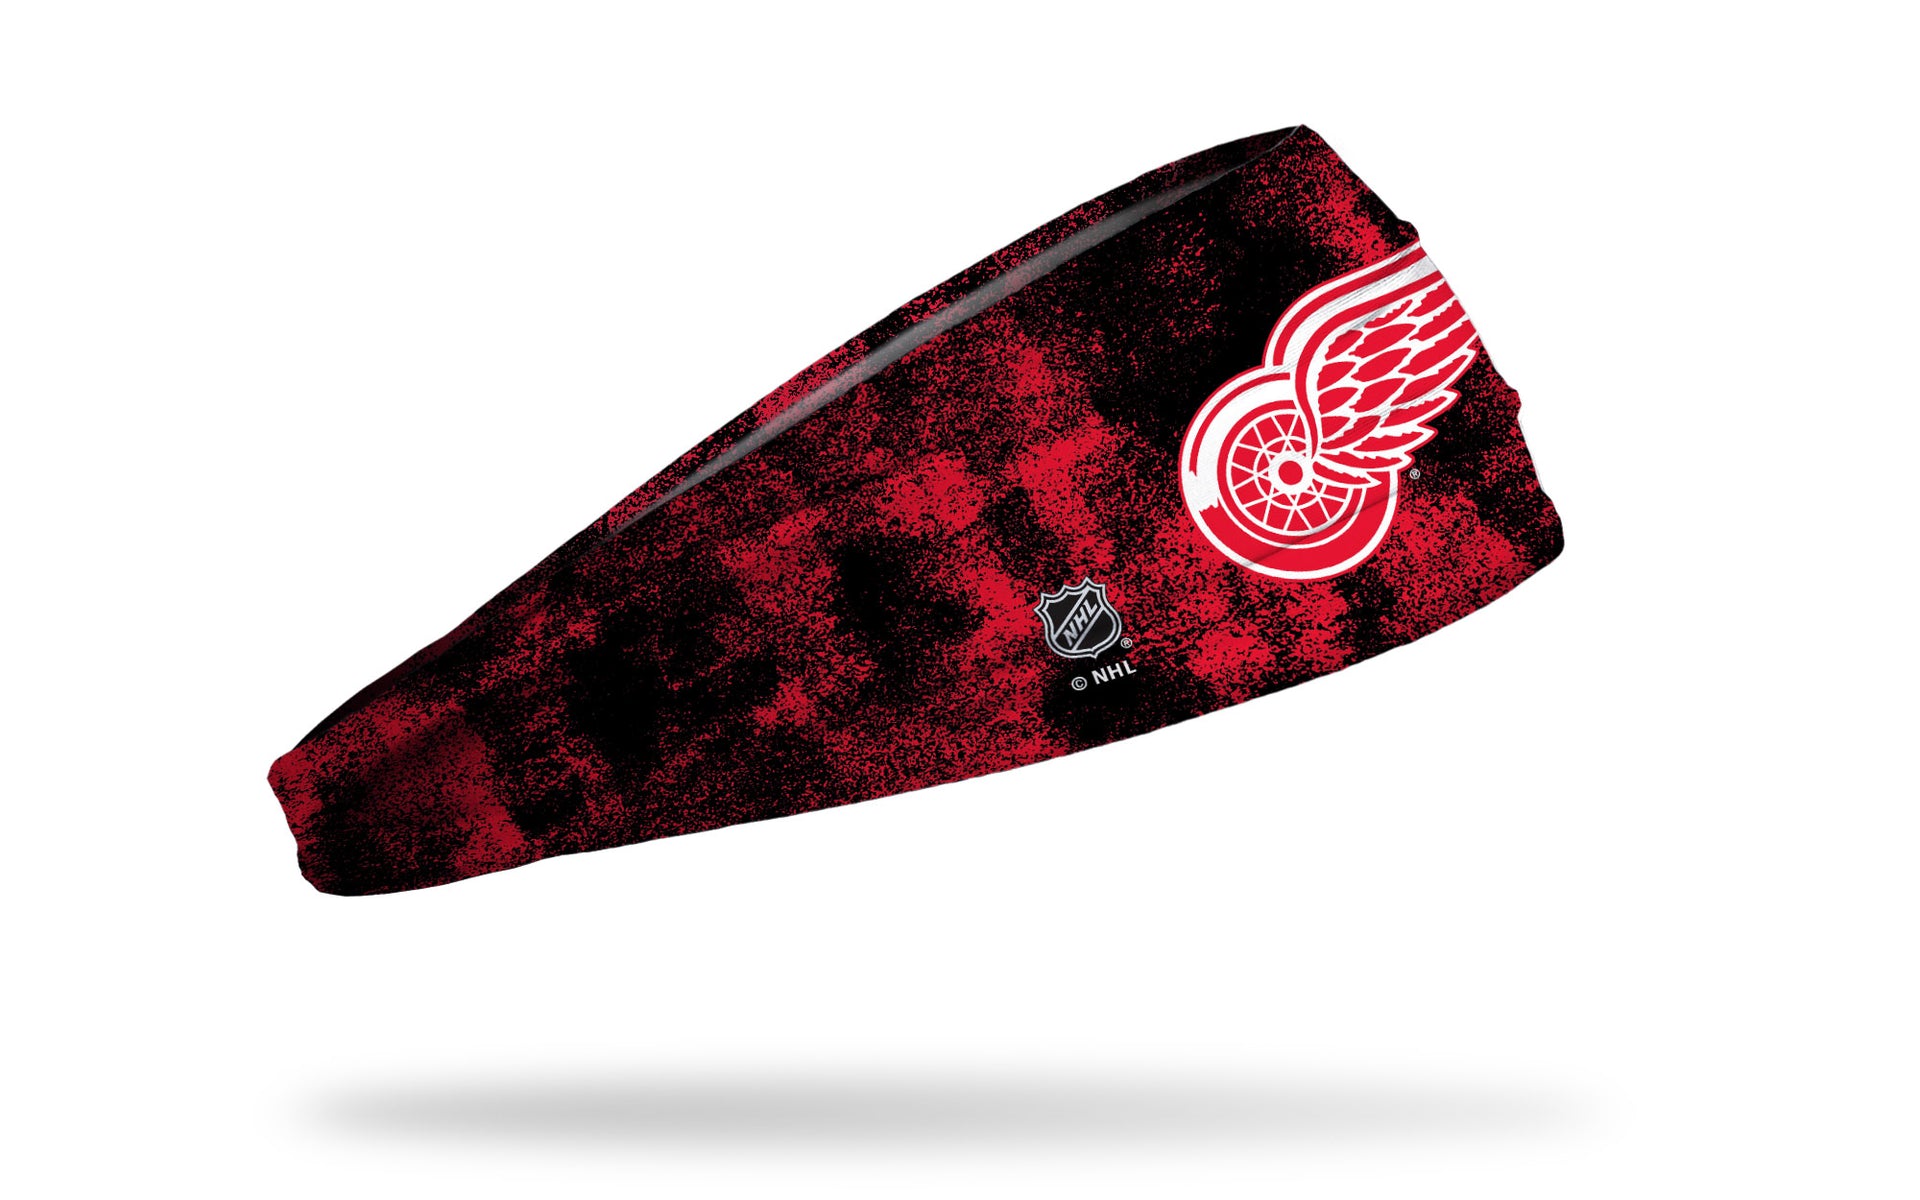 Detroit Red Wings: Grunge Headband - View 2